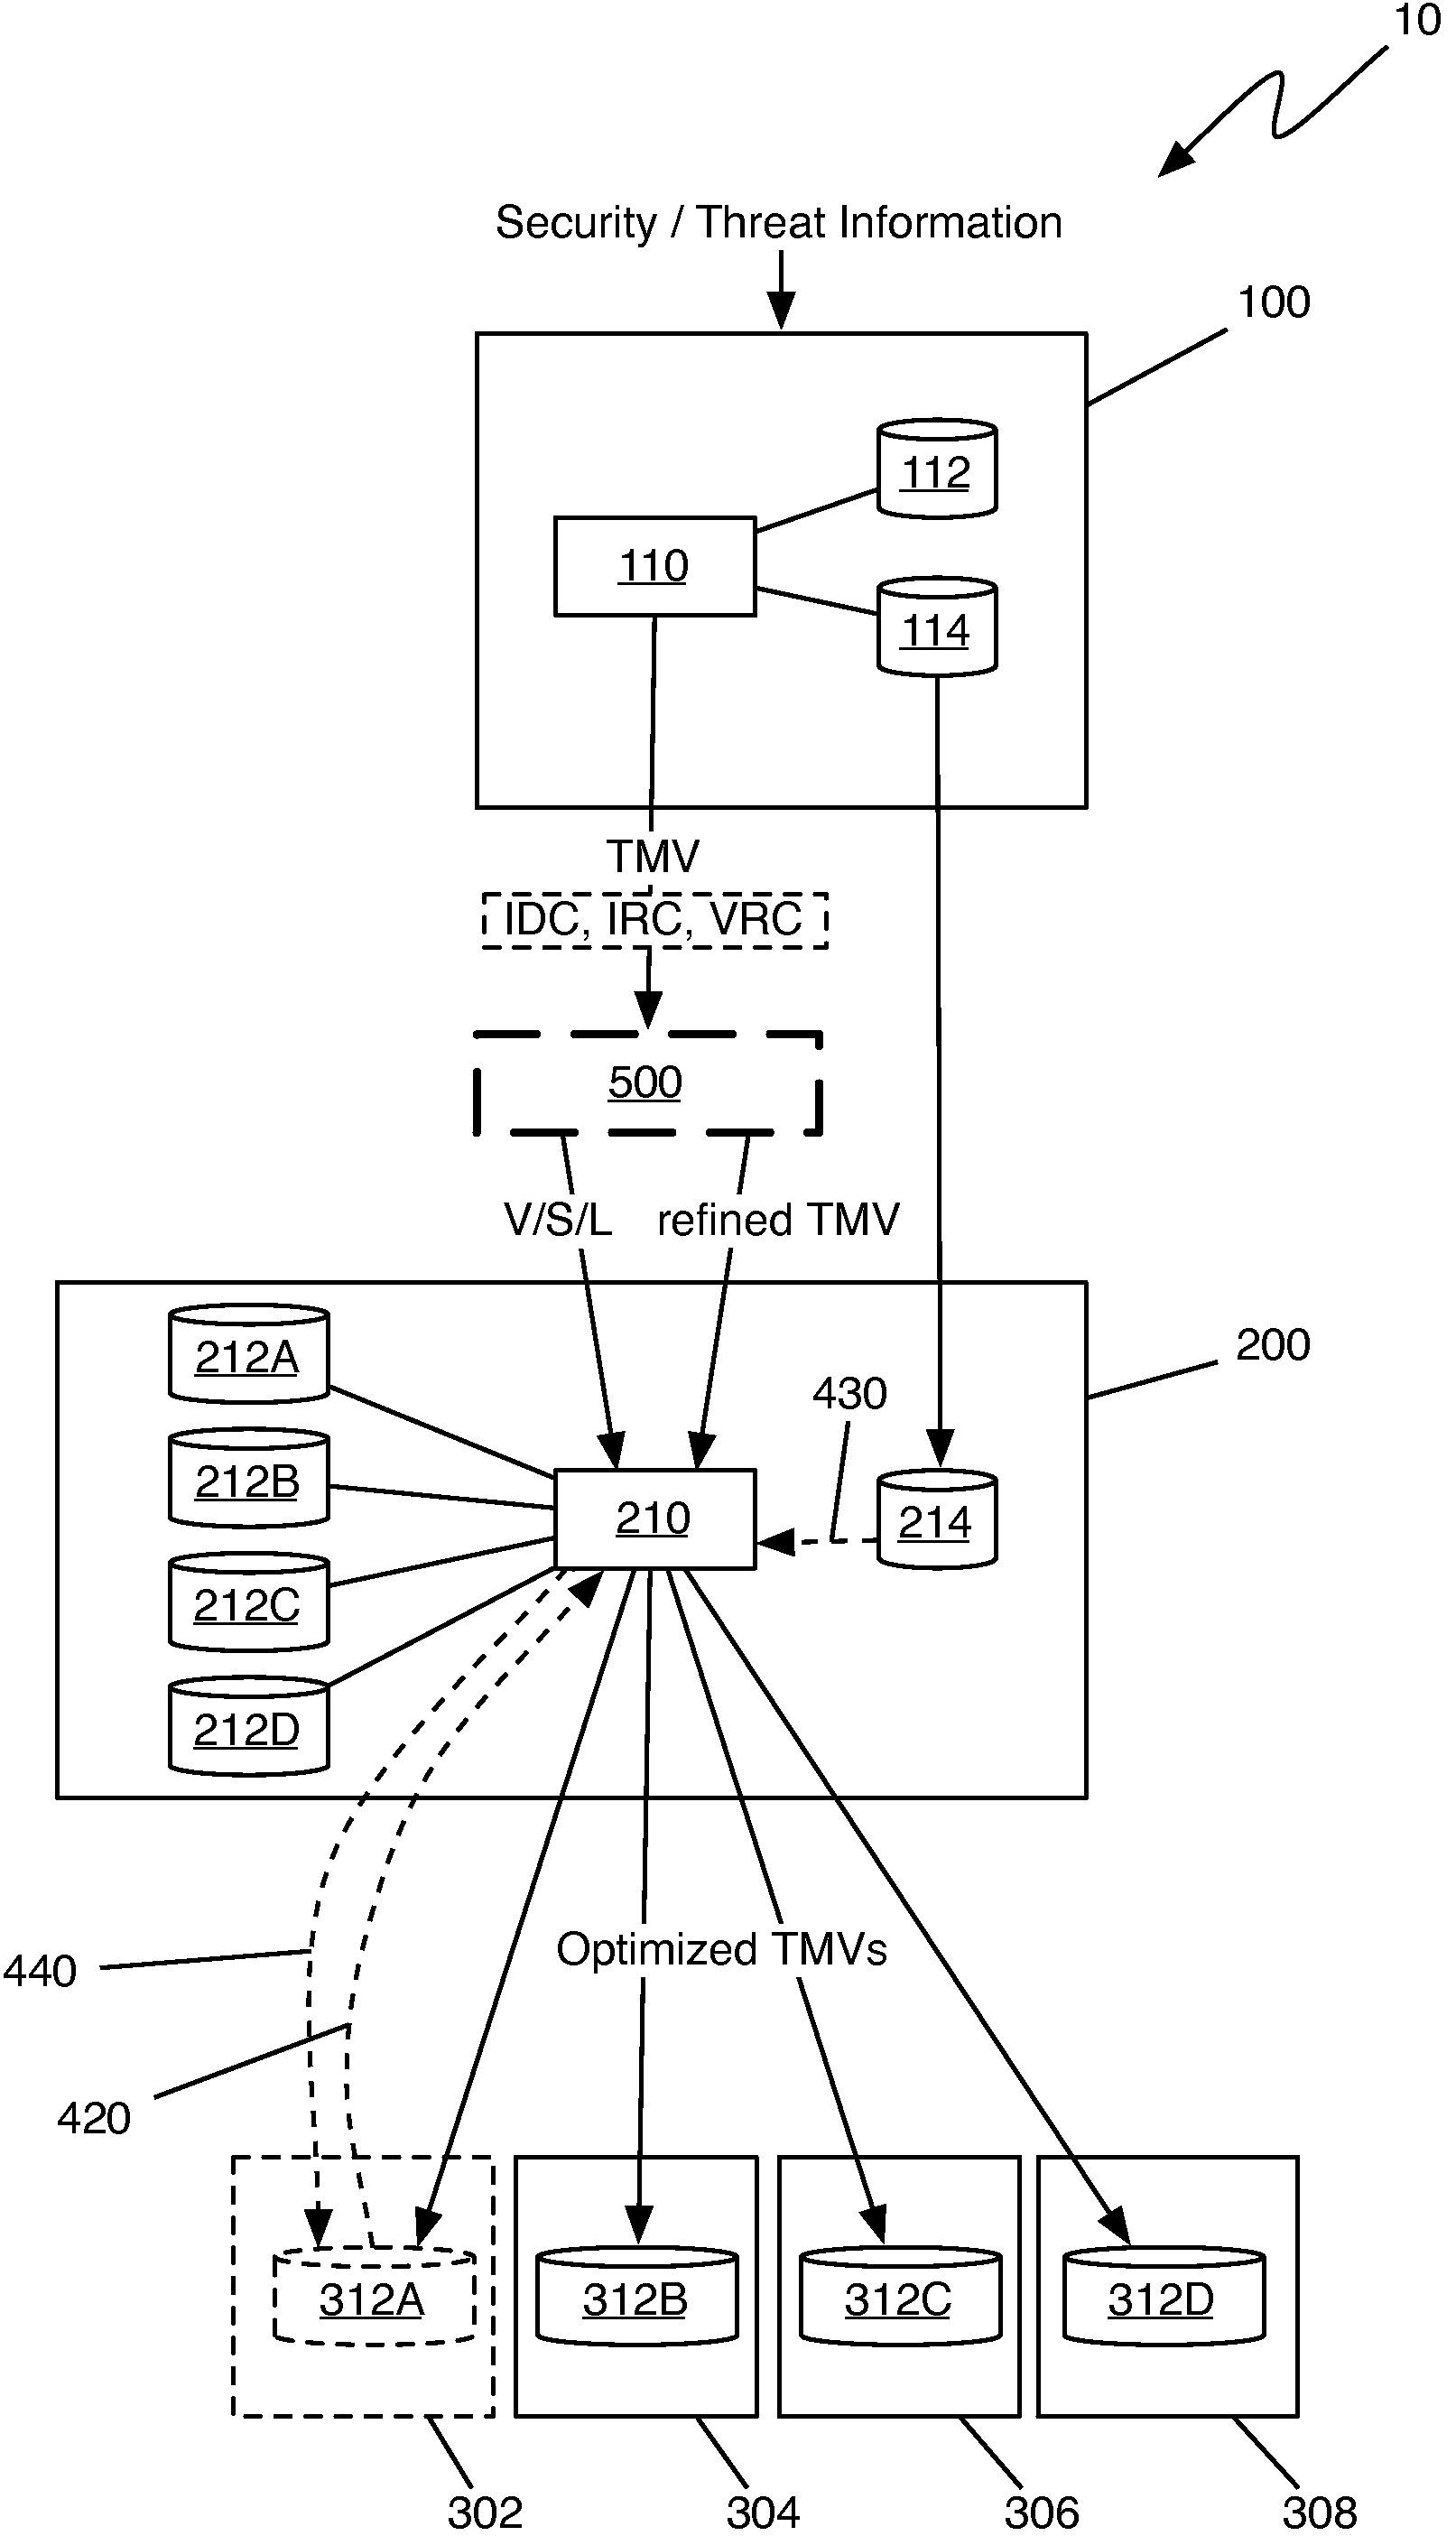 Method of integrating a security operations policy into a threat management vector